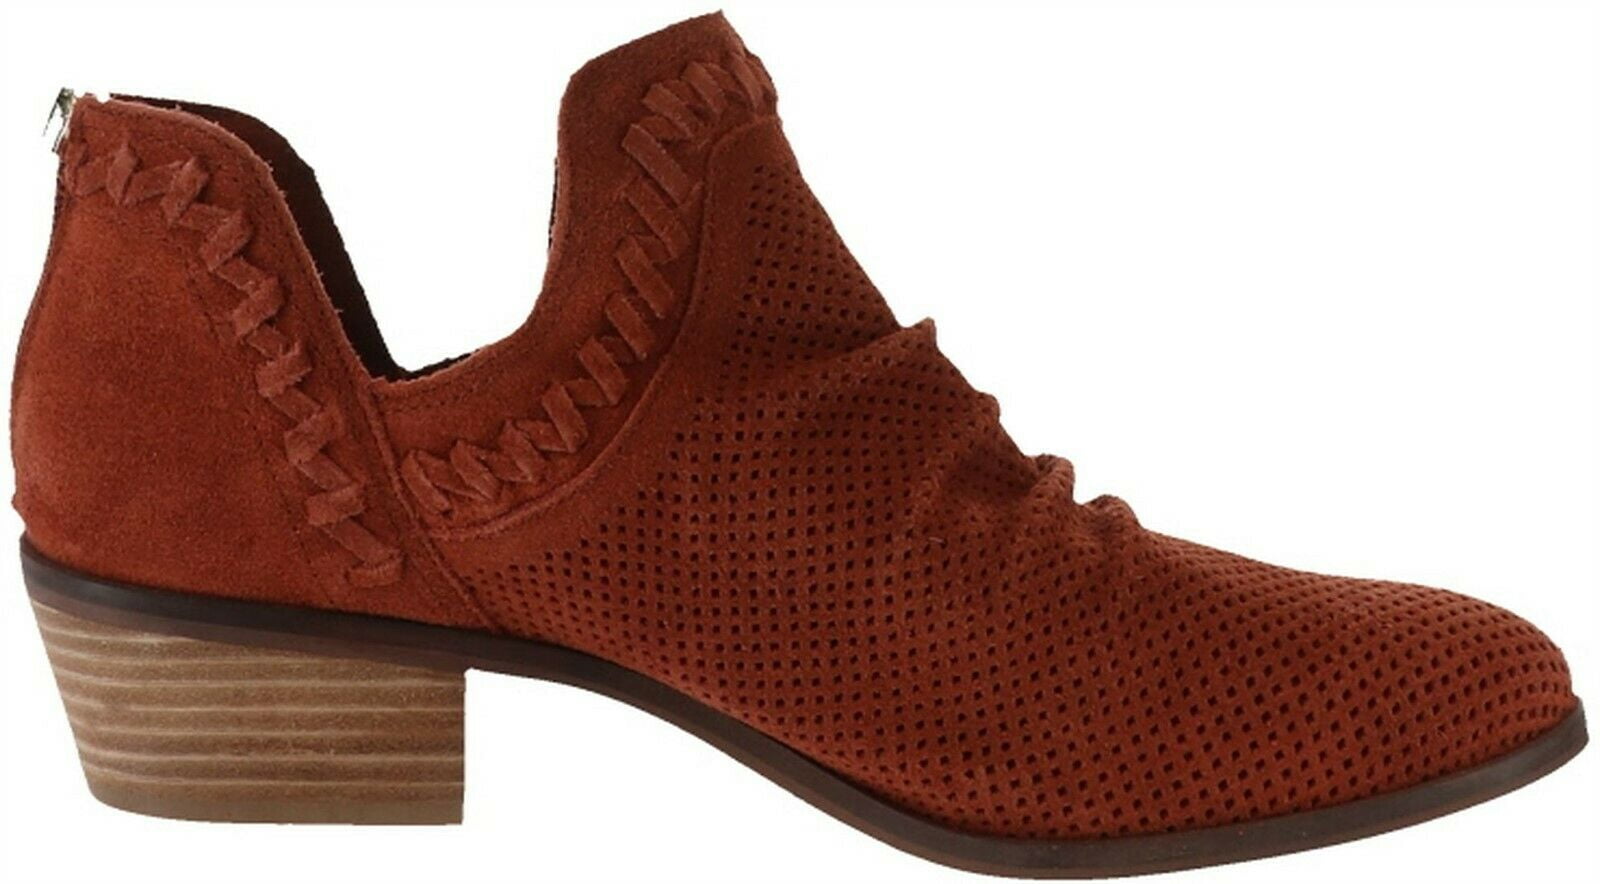 Vince Camuto Perforated Suede Ankle 